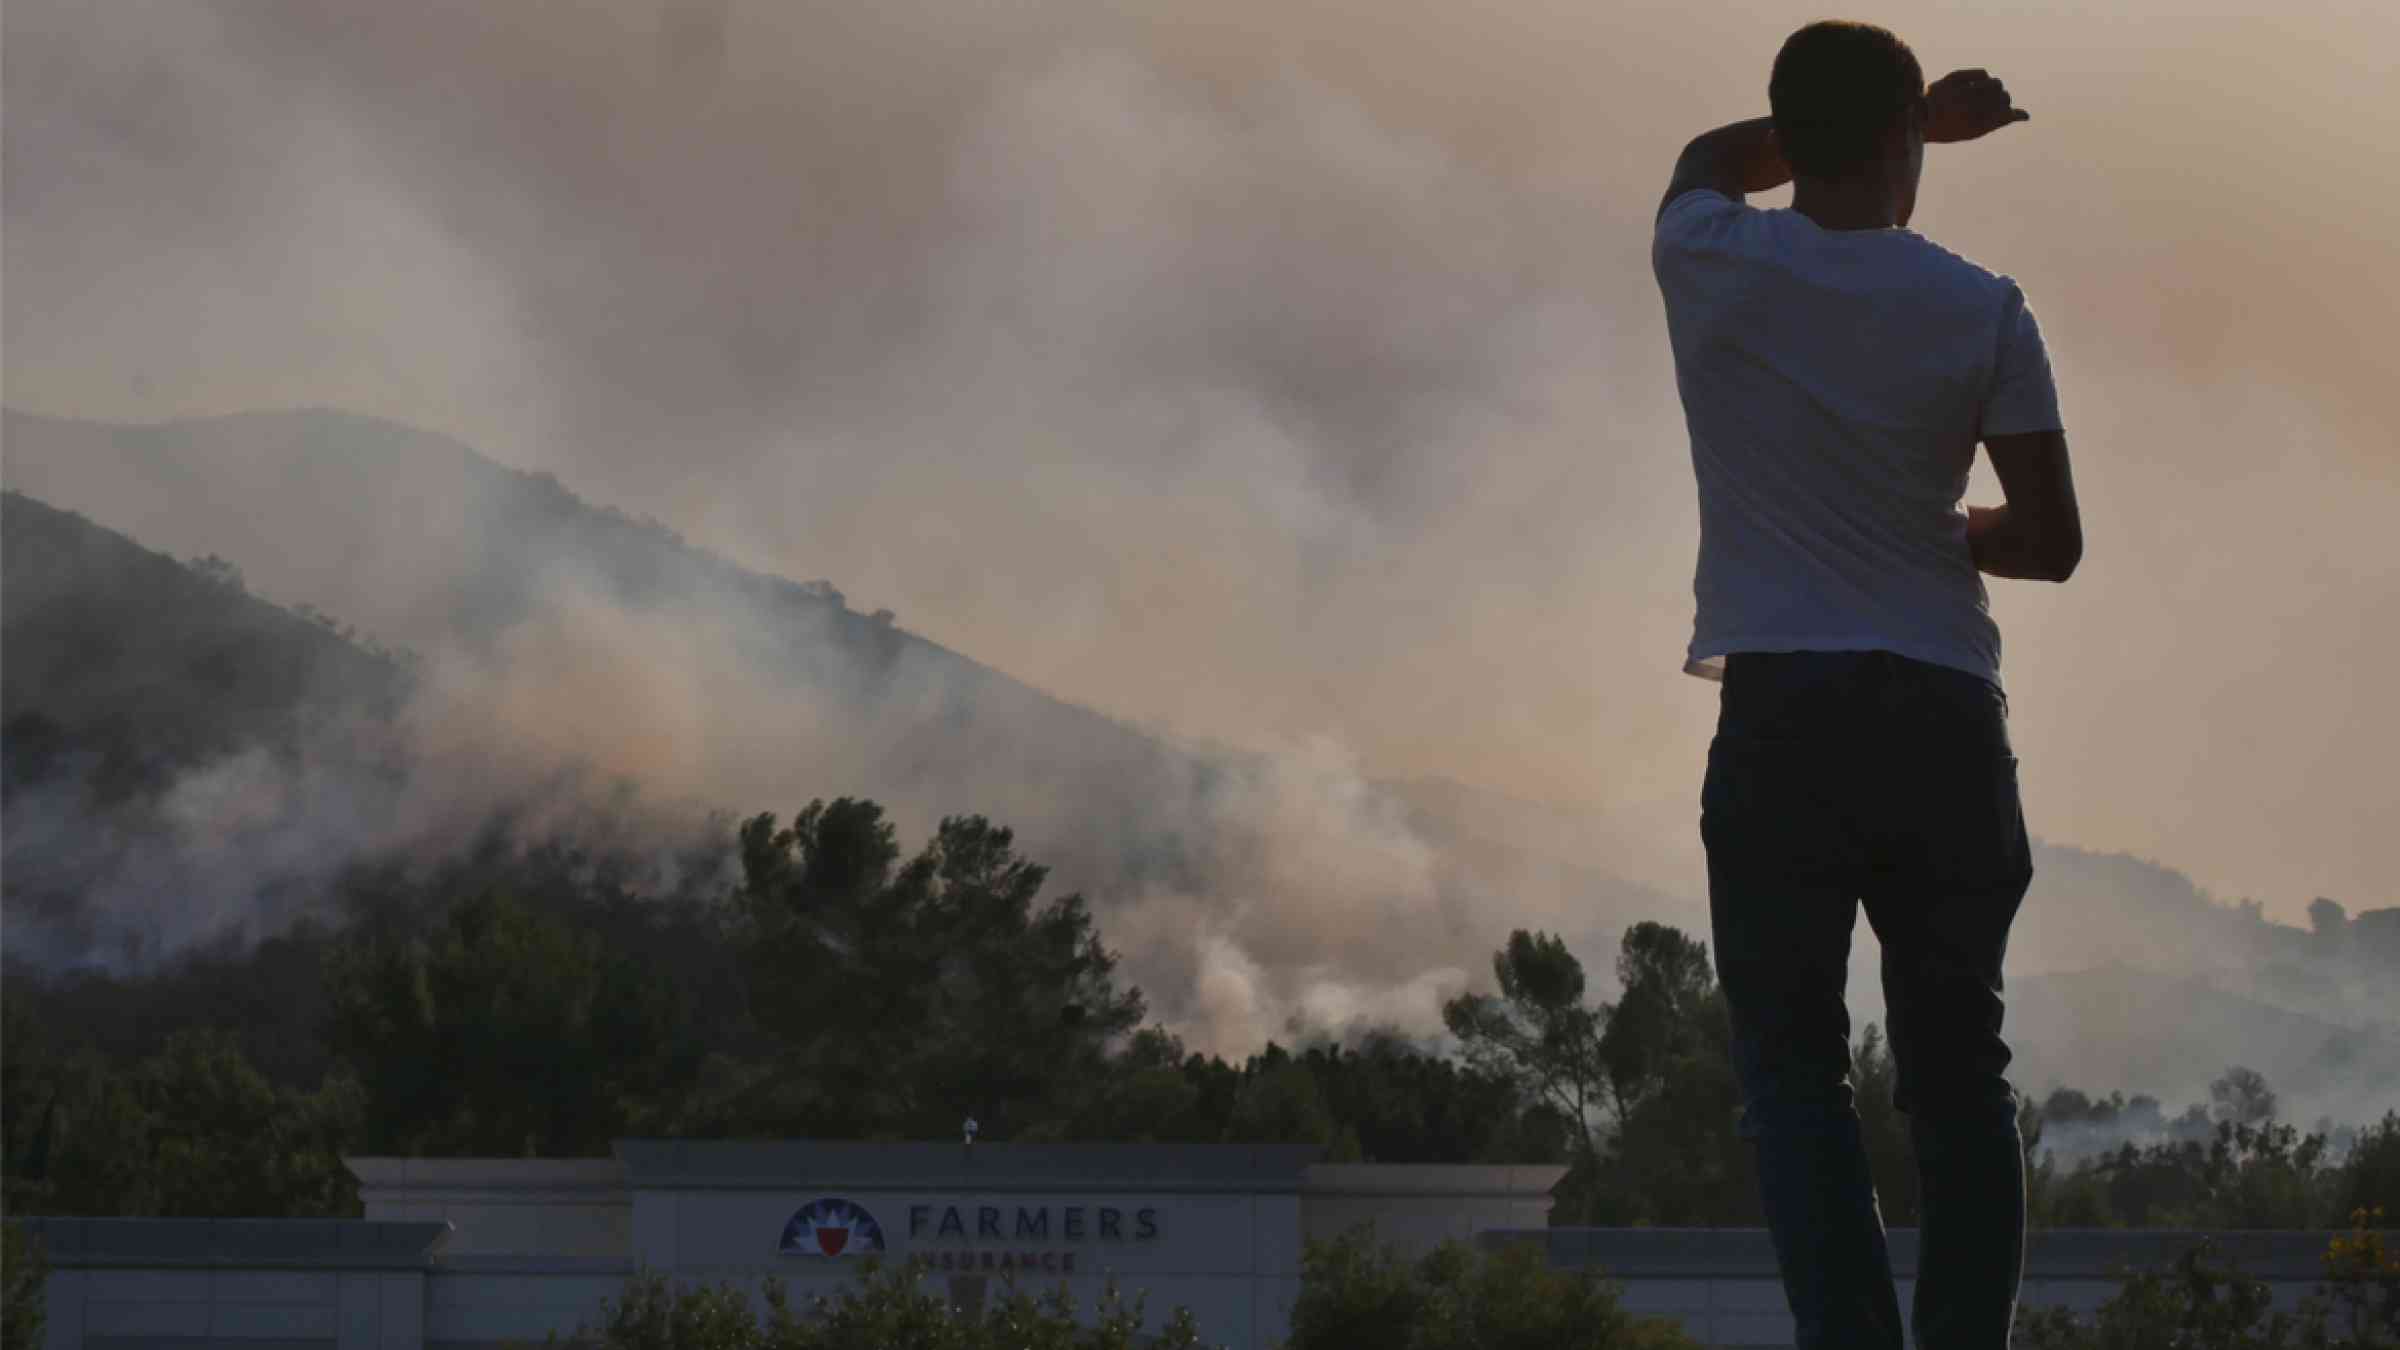 A Los Angeles resident observes the approaching wildfire